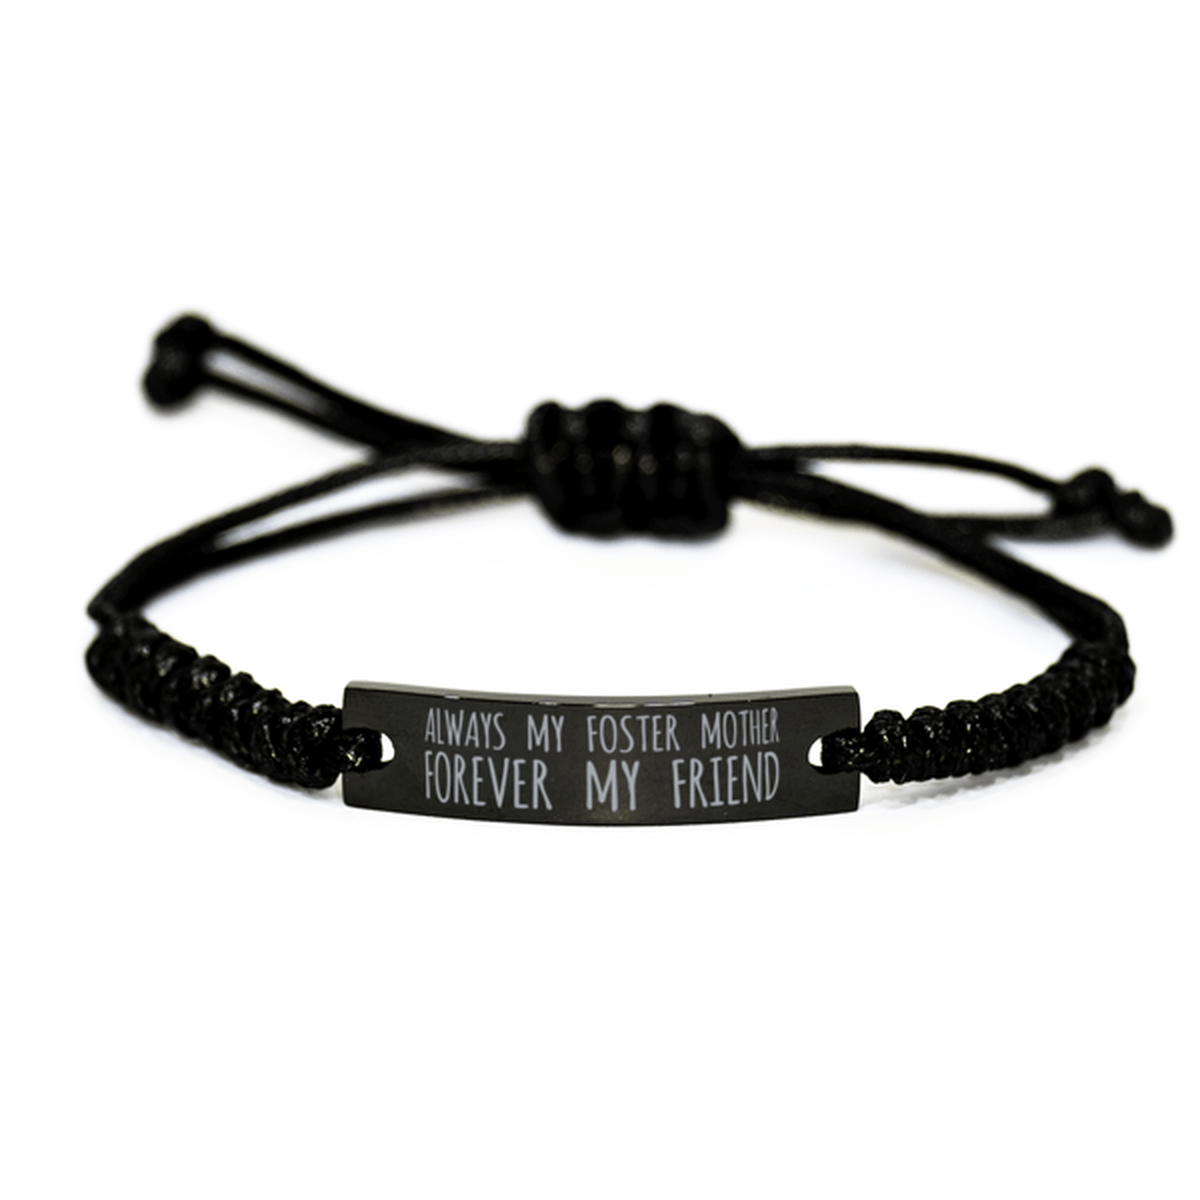 Inspirational Foster Mother Black Rope Bracelet, Always My Foster Mother Forever My Friend, Best Birthday Gifts For Family